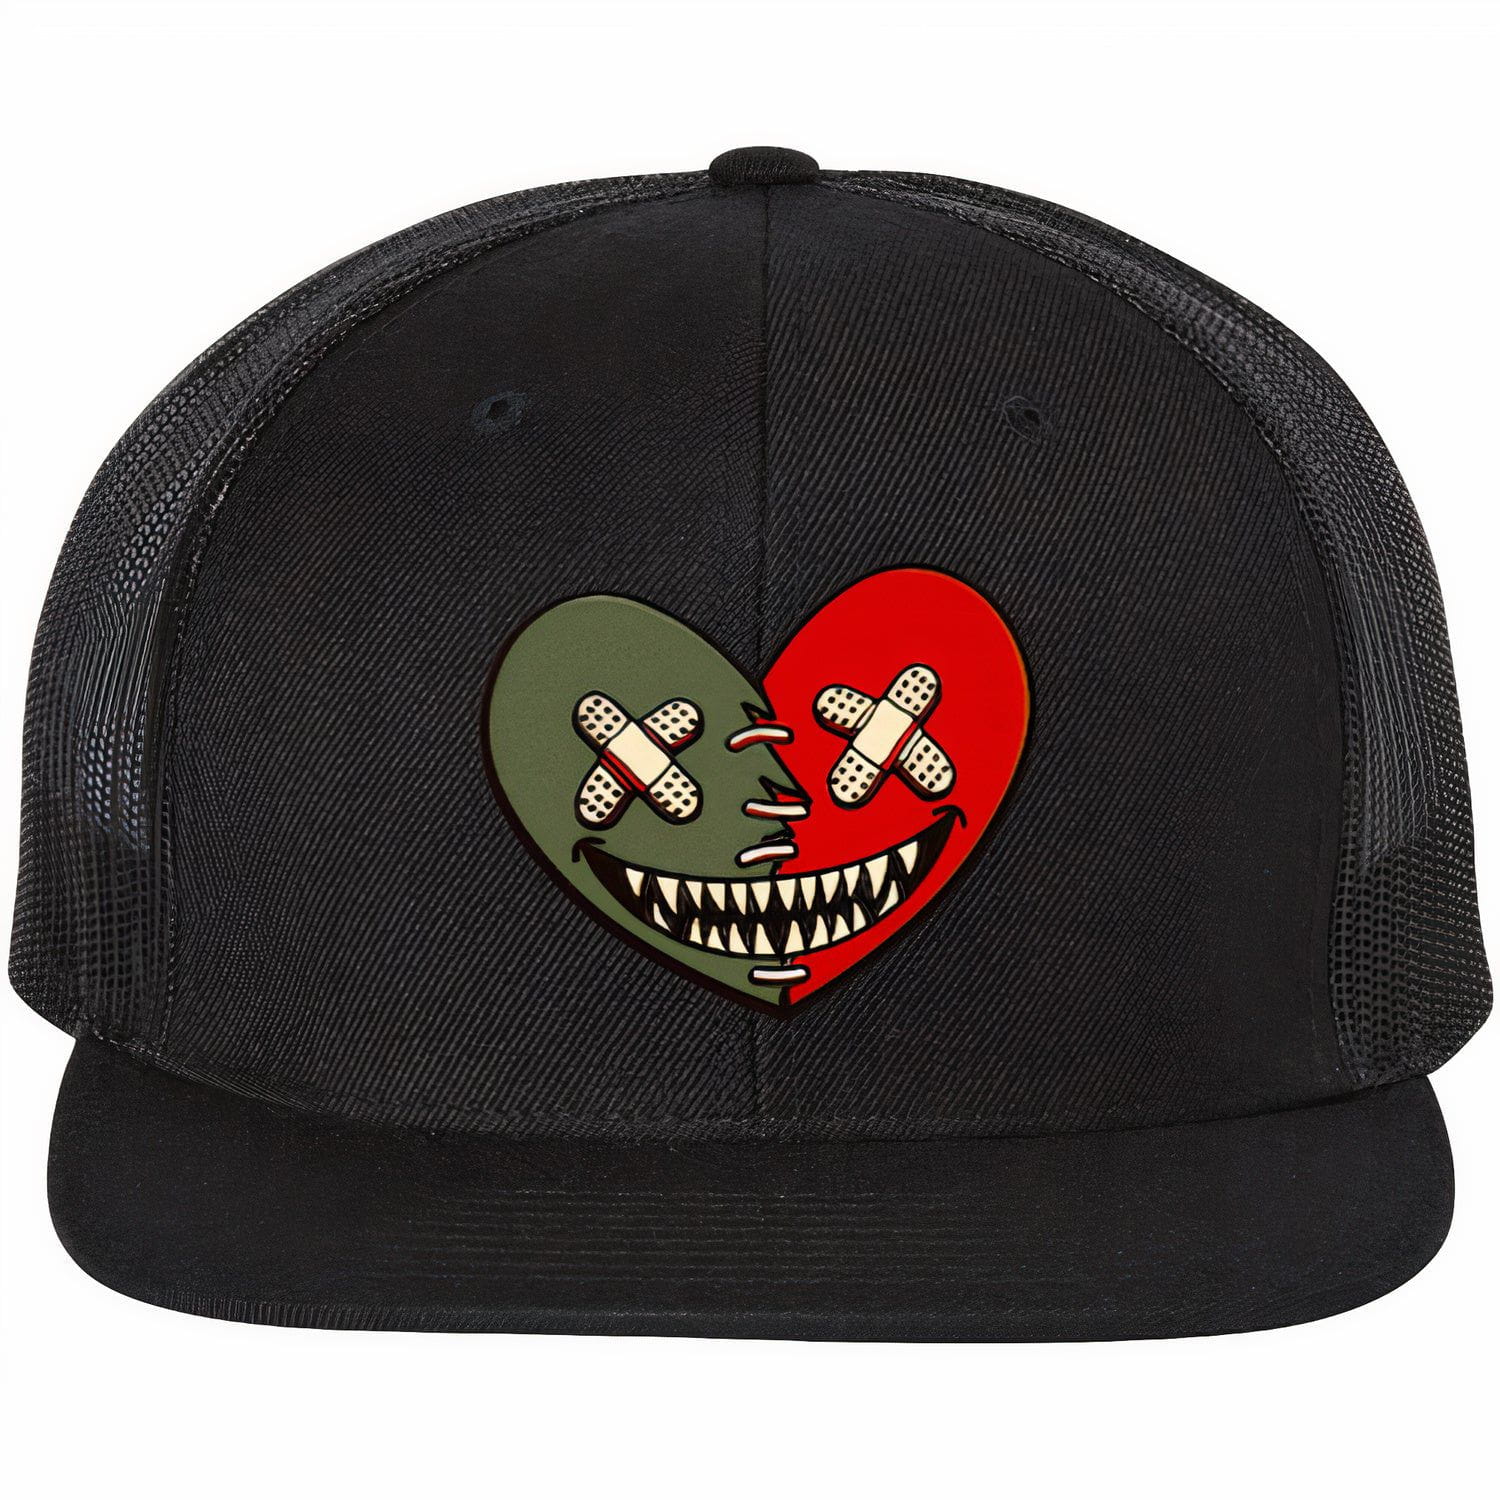 Mystic Red Dunks Snapback Trucker Hats - Olive Heart Baws